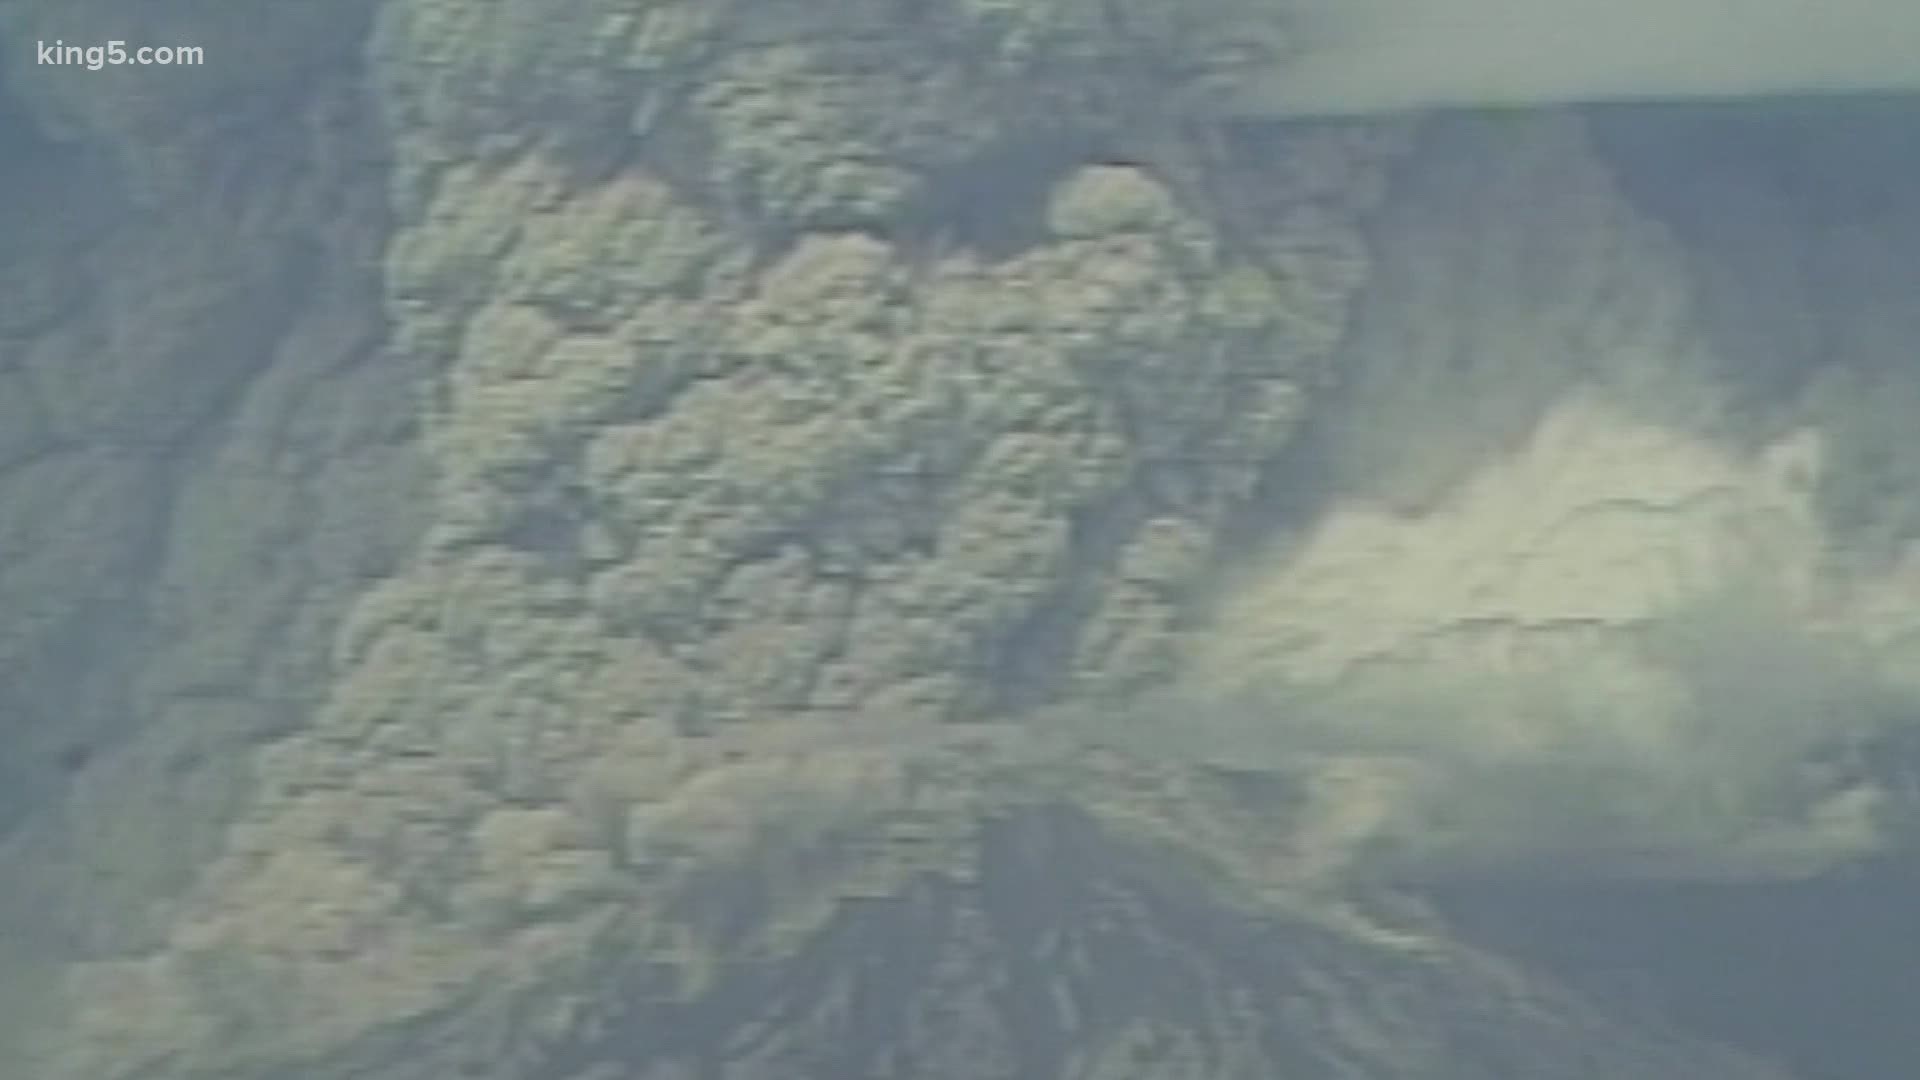 Stay-at-home orders have financially hurt the Mount St. Helens Institute, which supports work on the volcano.